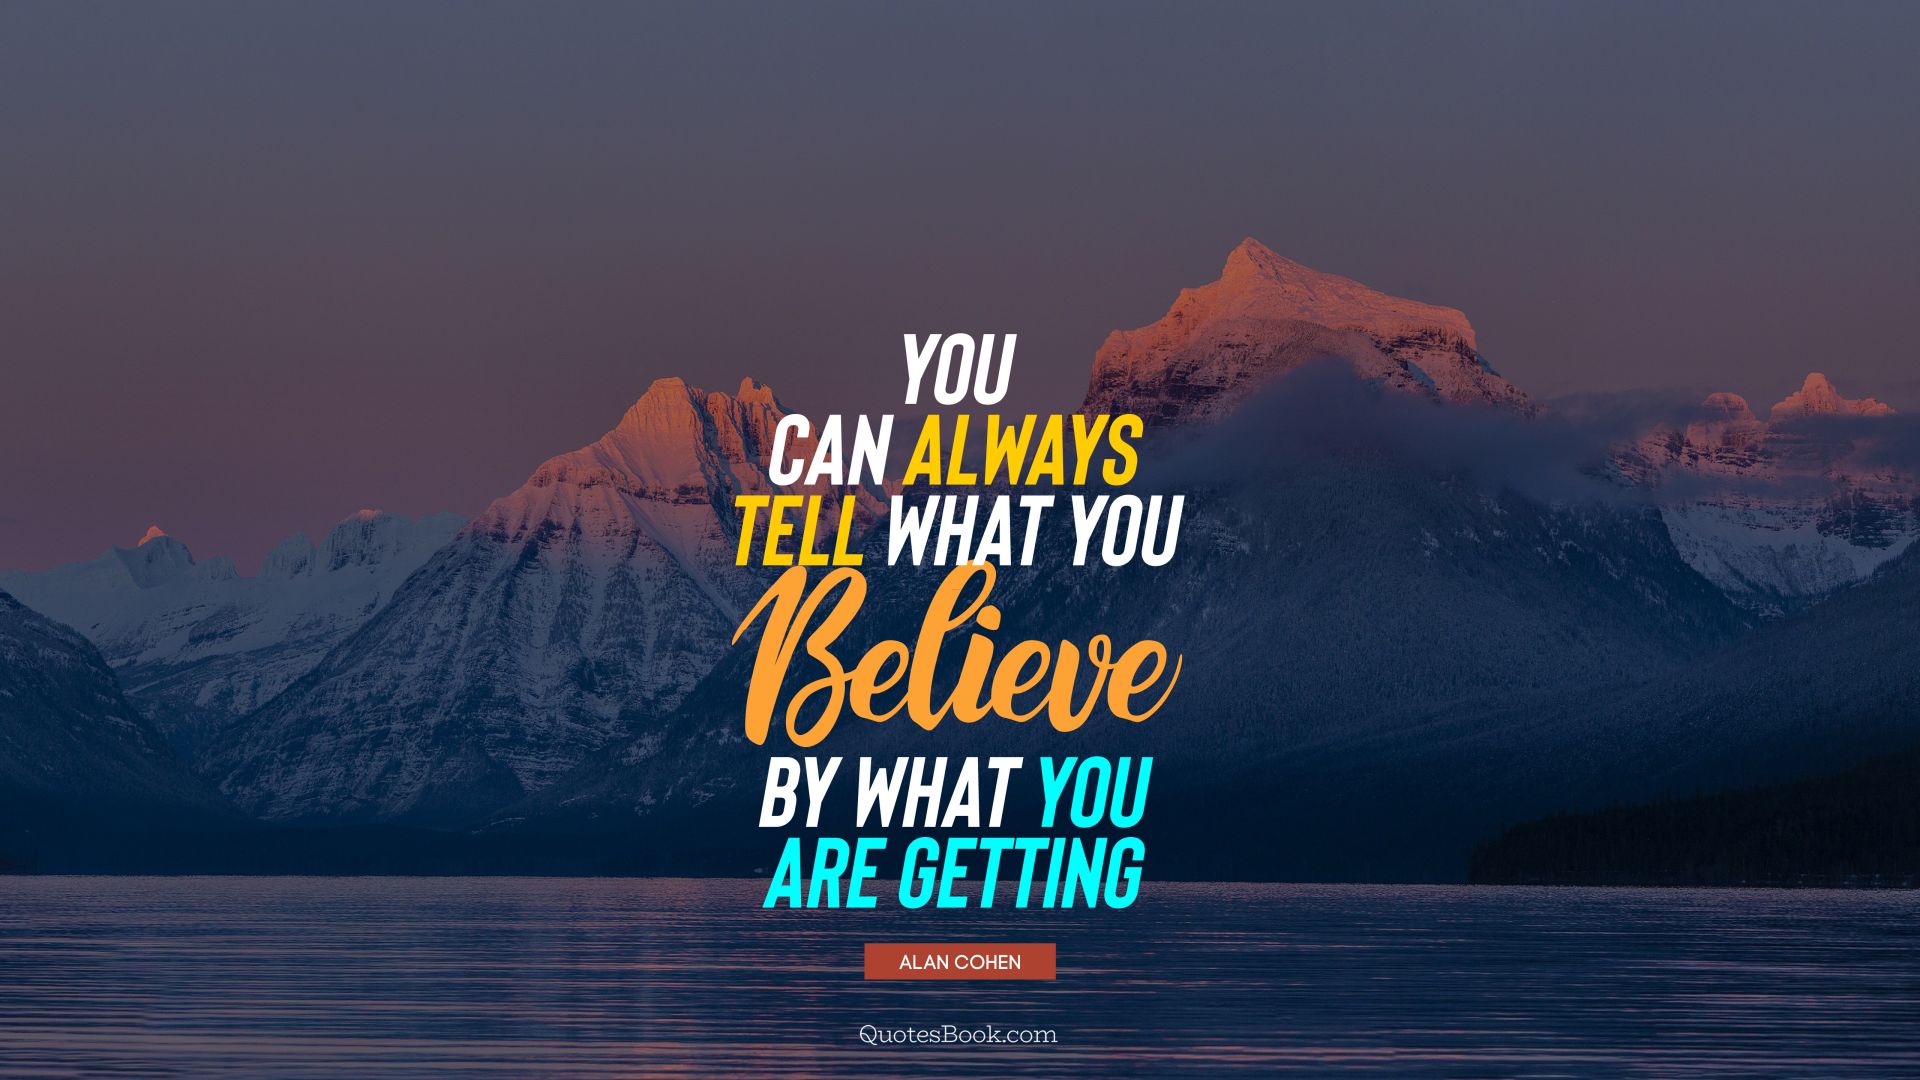 You can always tell what you believe by what you are getting. - Quote by Alan Cohen